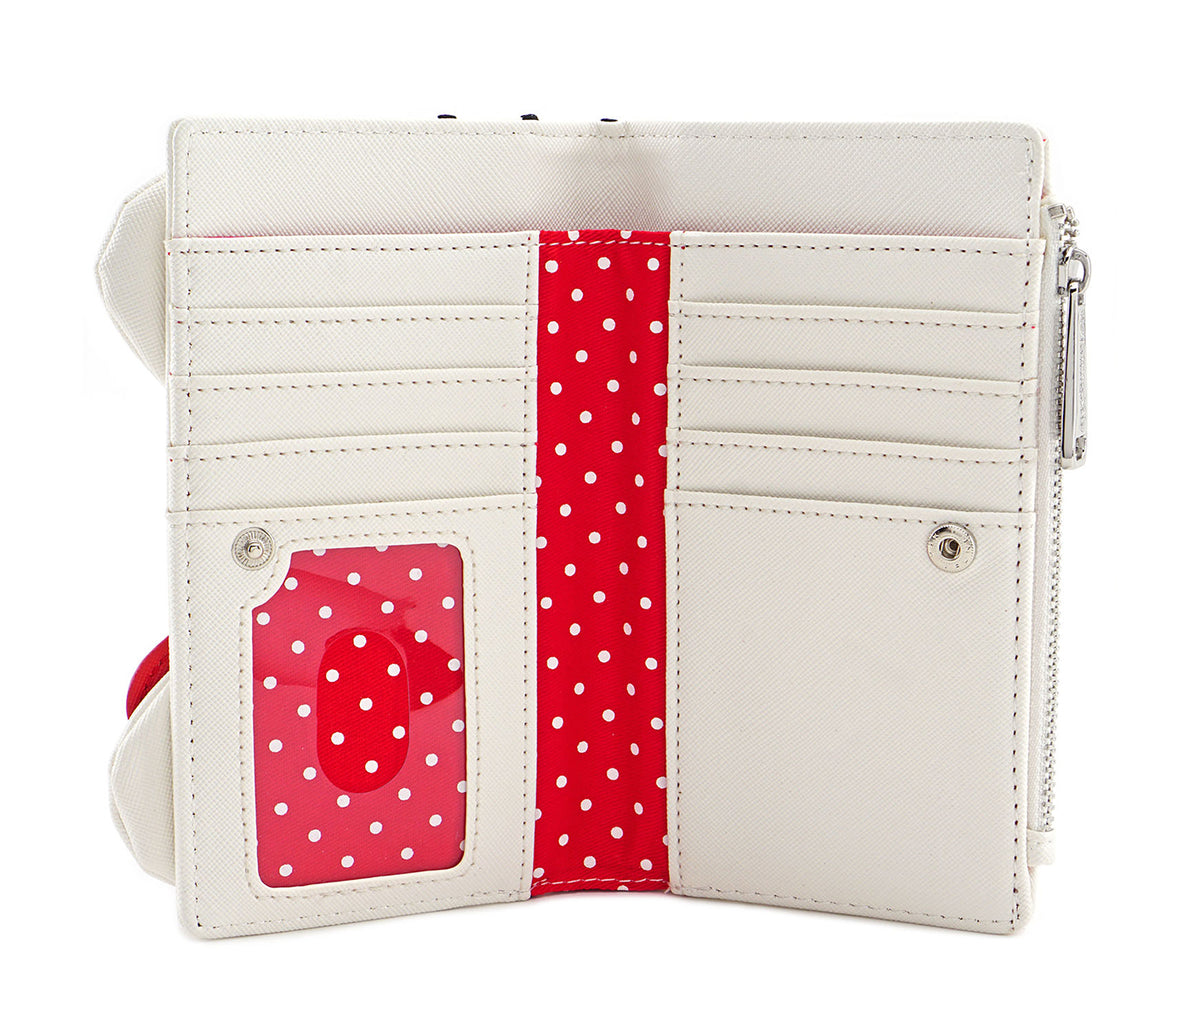 Hello Kitty x Loungefly Classic Face Bifold Wallet Bags Loungefly   